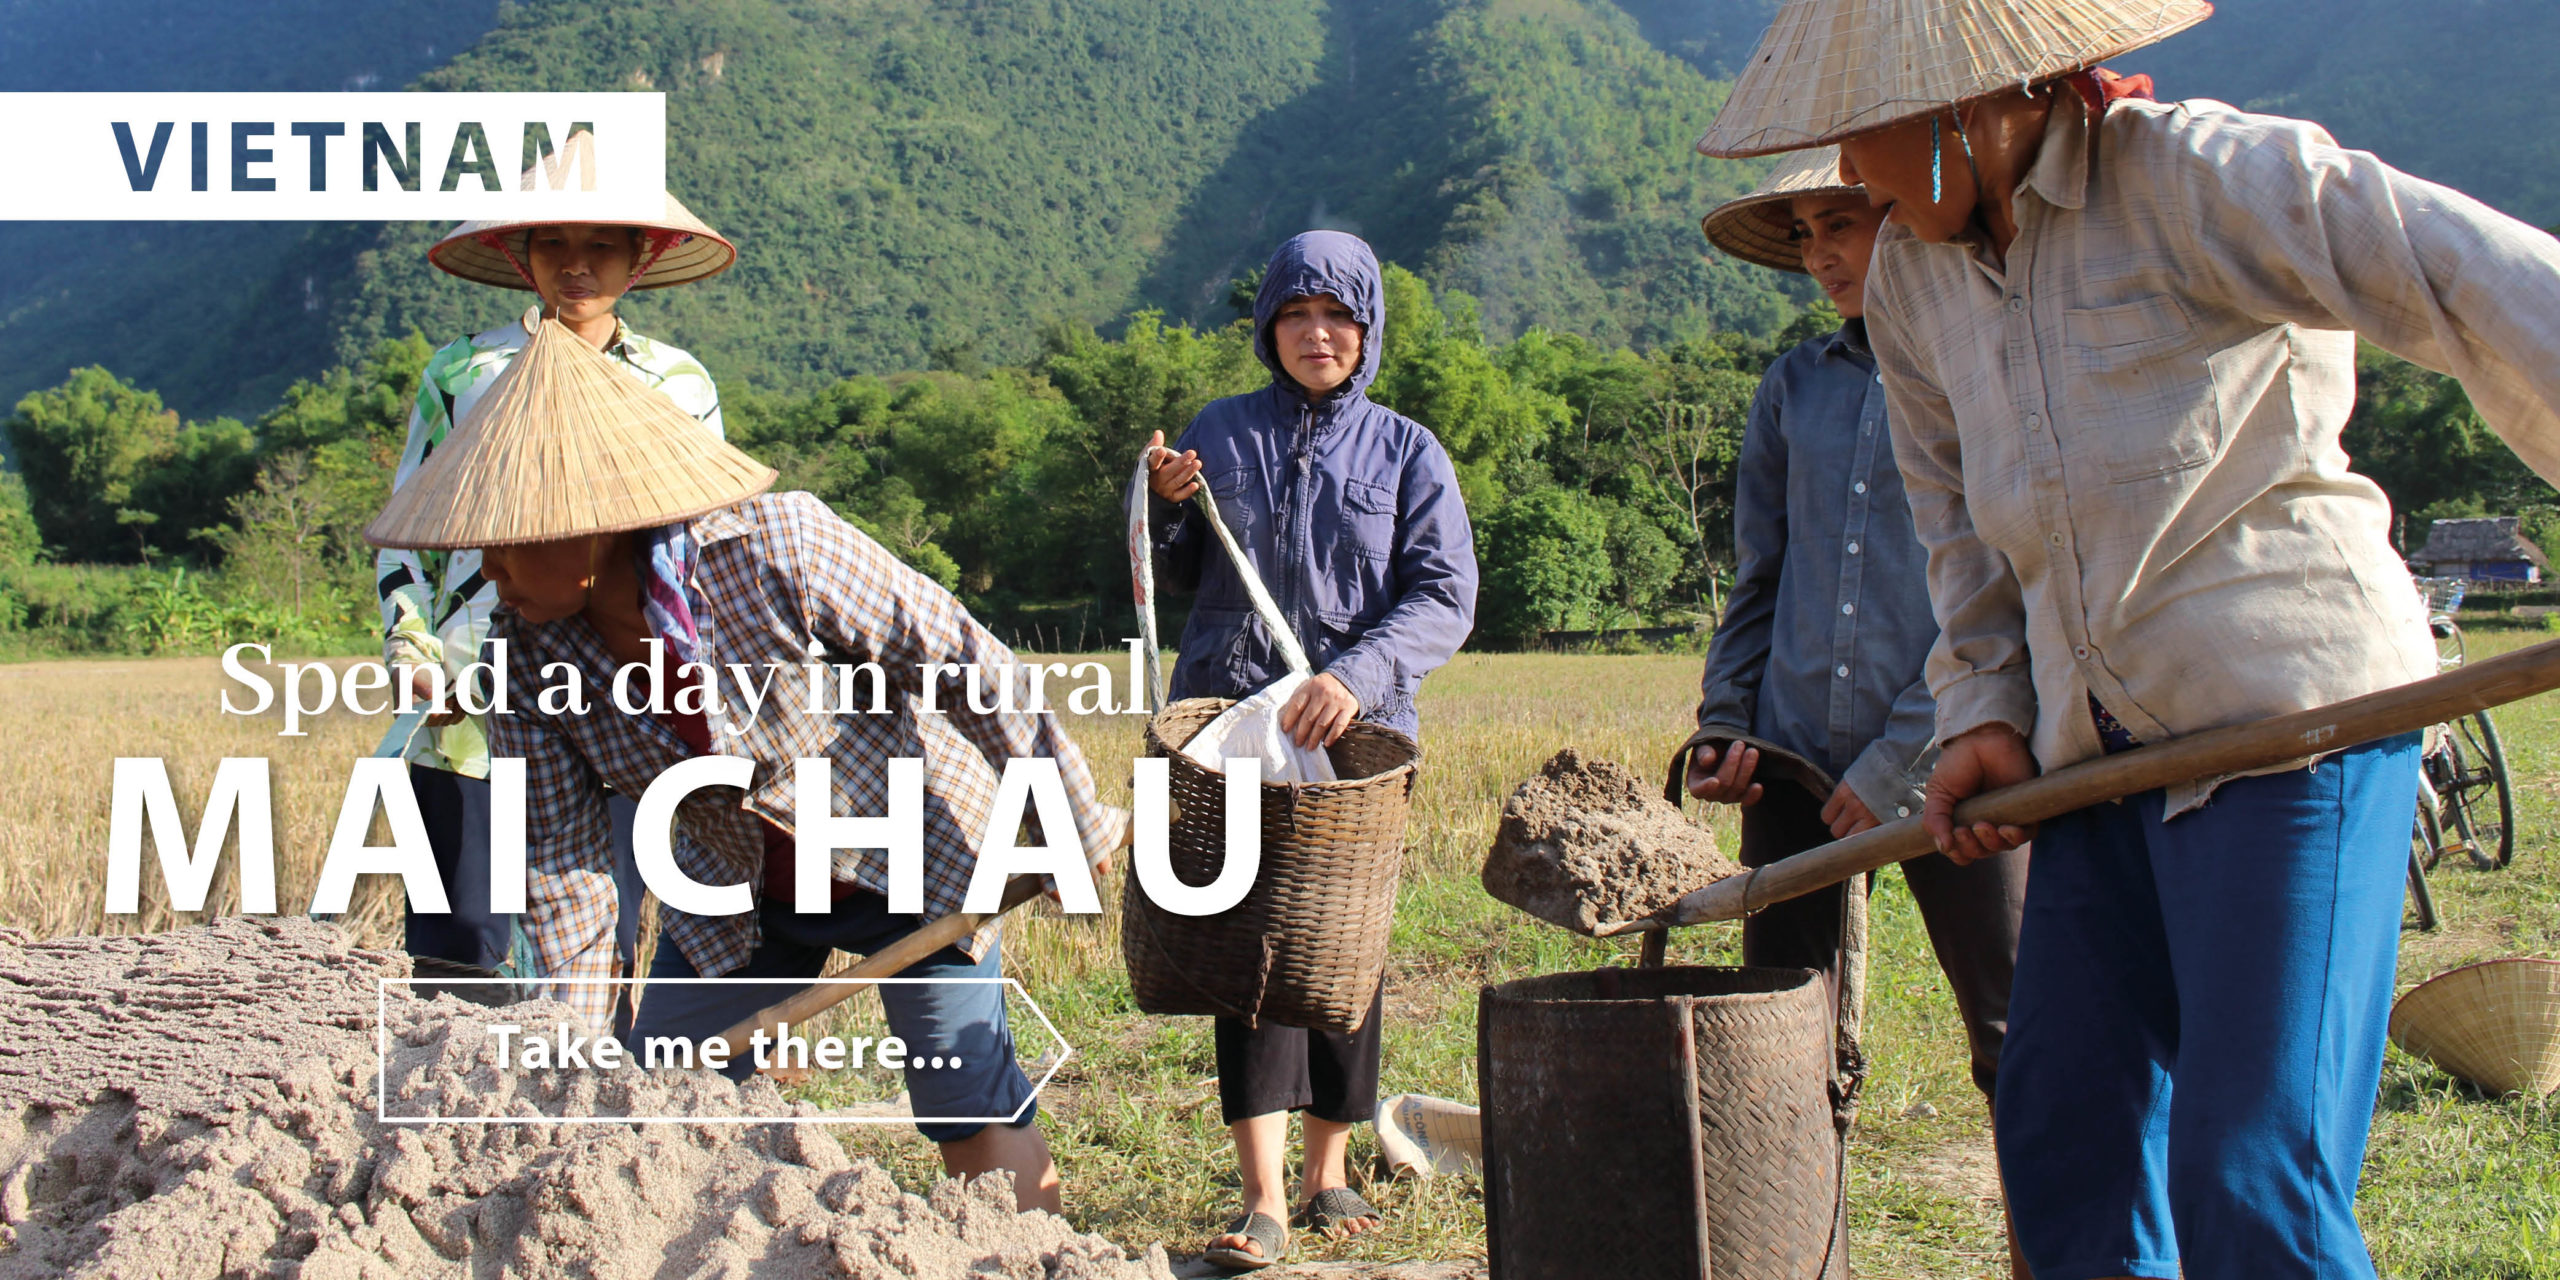 Authentic experience Vietnam, spend a day in Mai Chau
